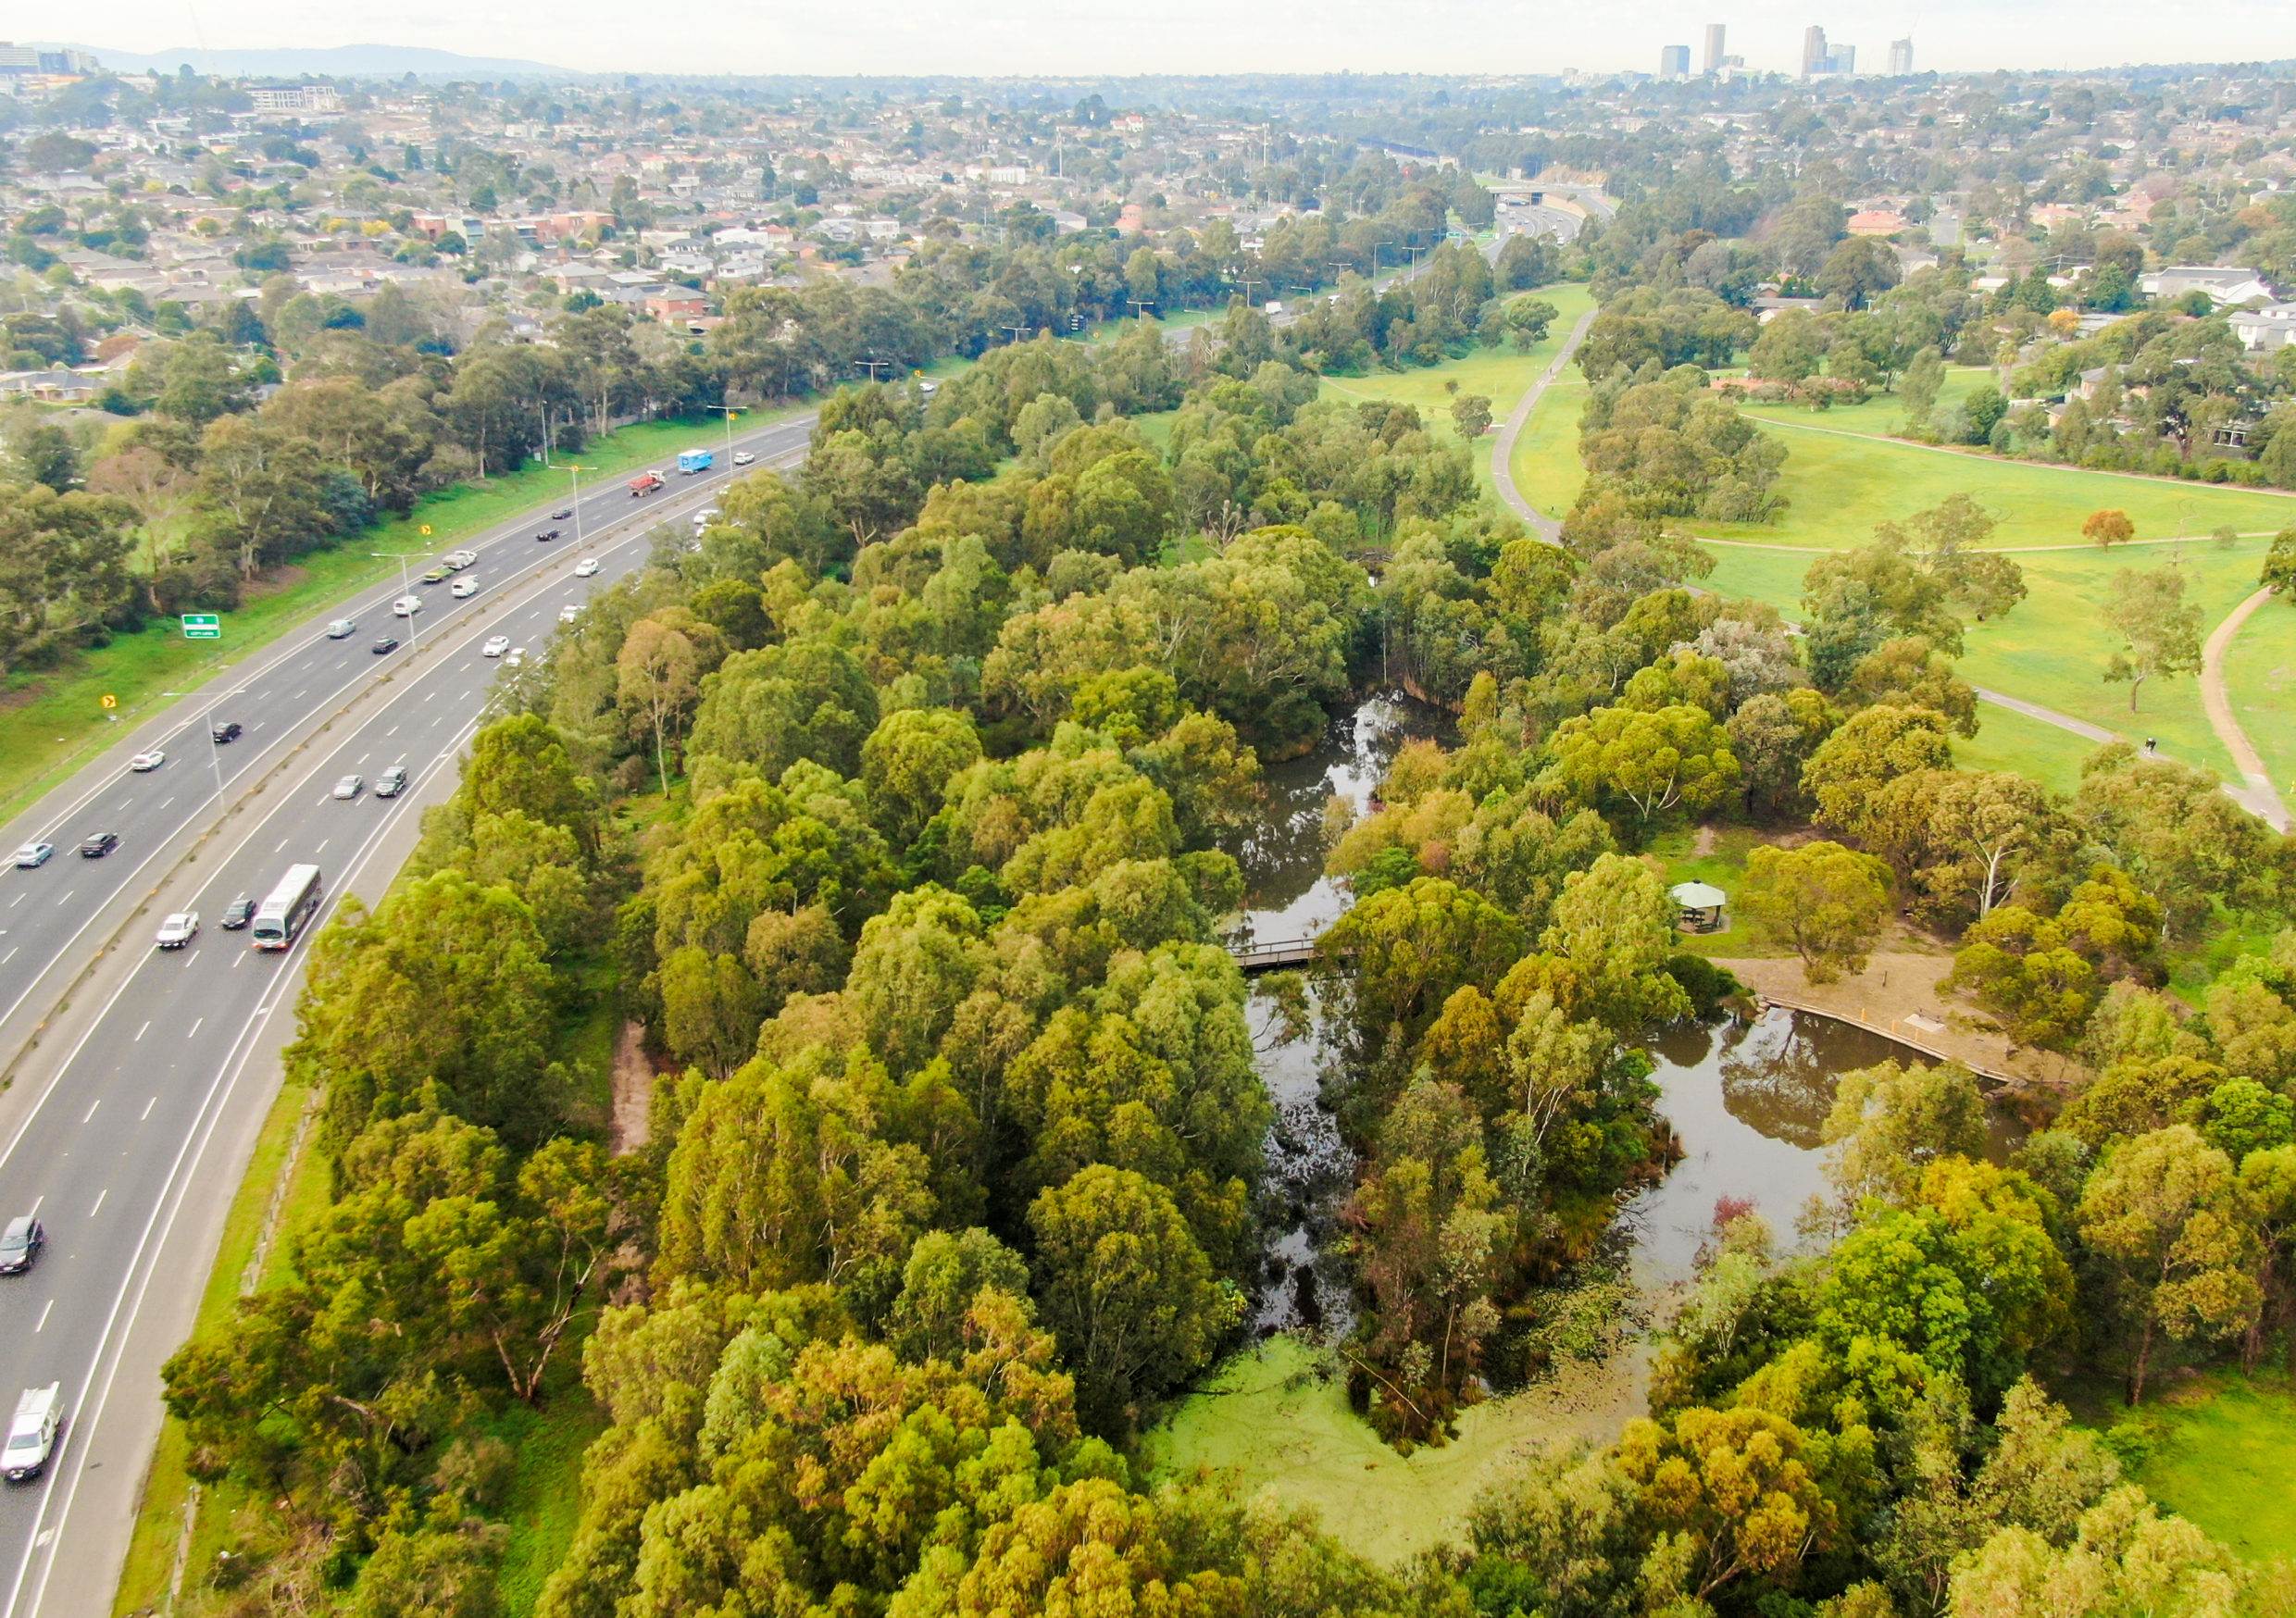 An aerial view of the Eastern Freeway with the Freeway golf course alongside it